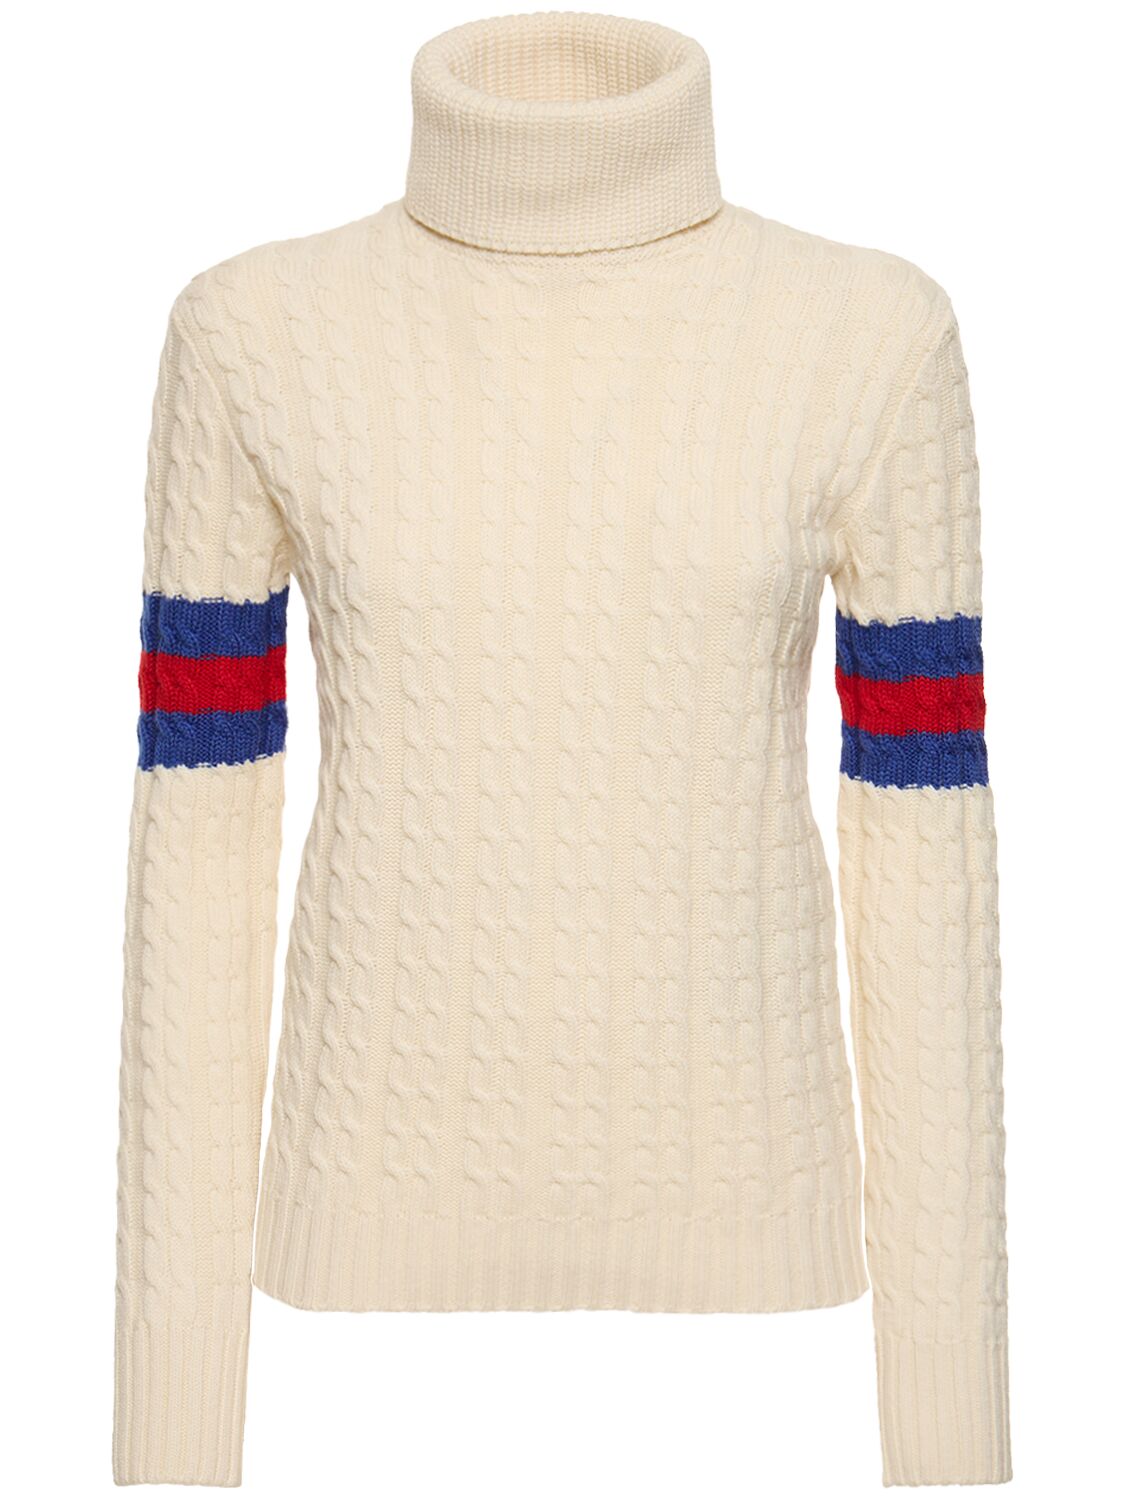 Gucci Wool & Cashmere Cable Knit Sweater In Ivory,blue,red